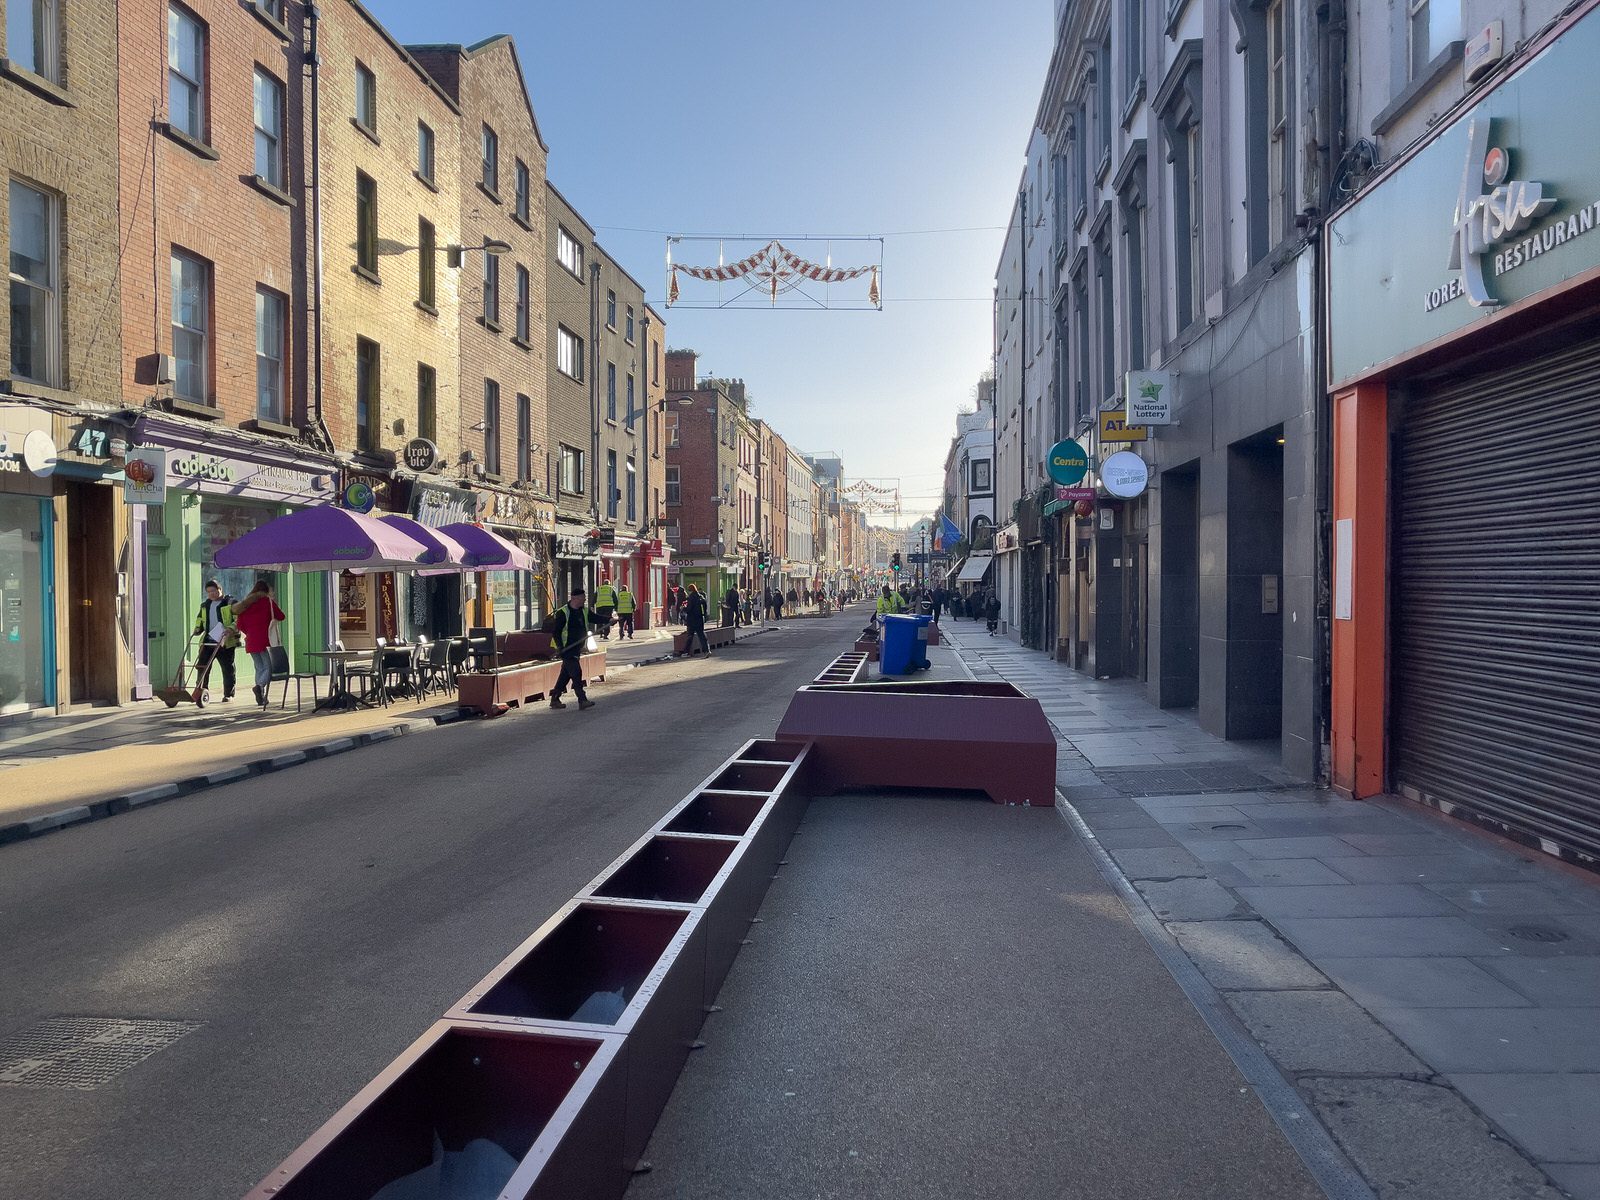 THE NEW STREET FURNITURE AND THE CHRISTMAS TREE [HAVE ARRIVED IN CAPEL STREET]-225859-1